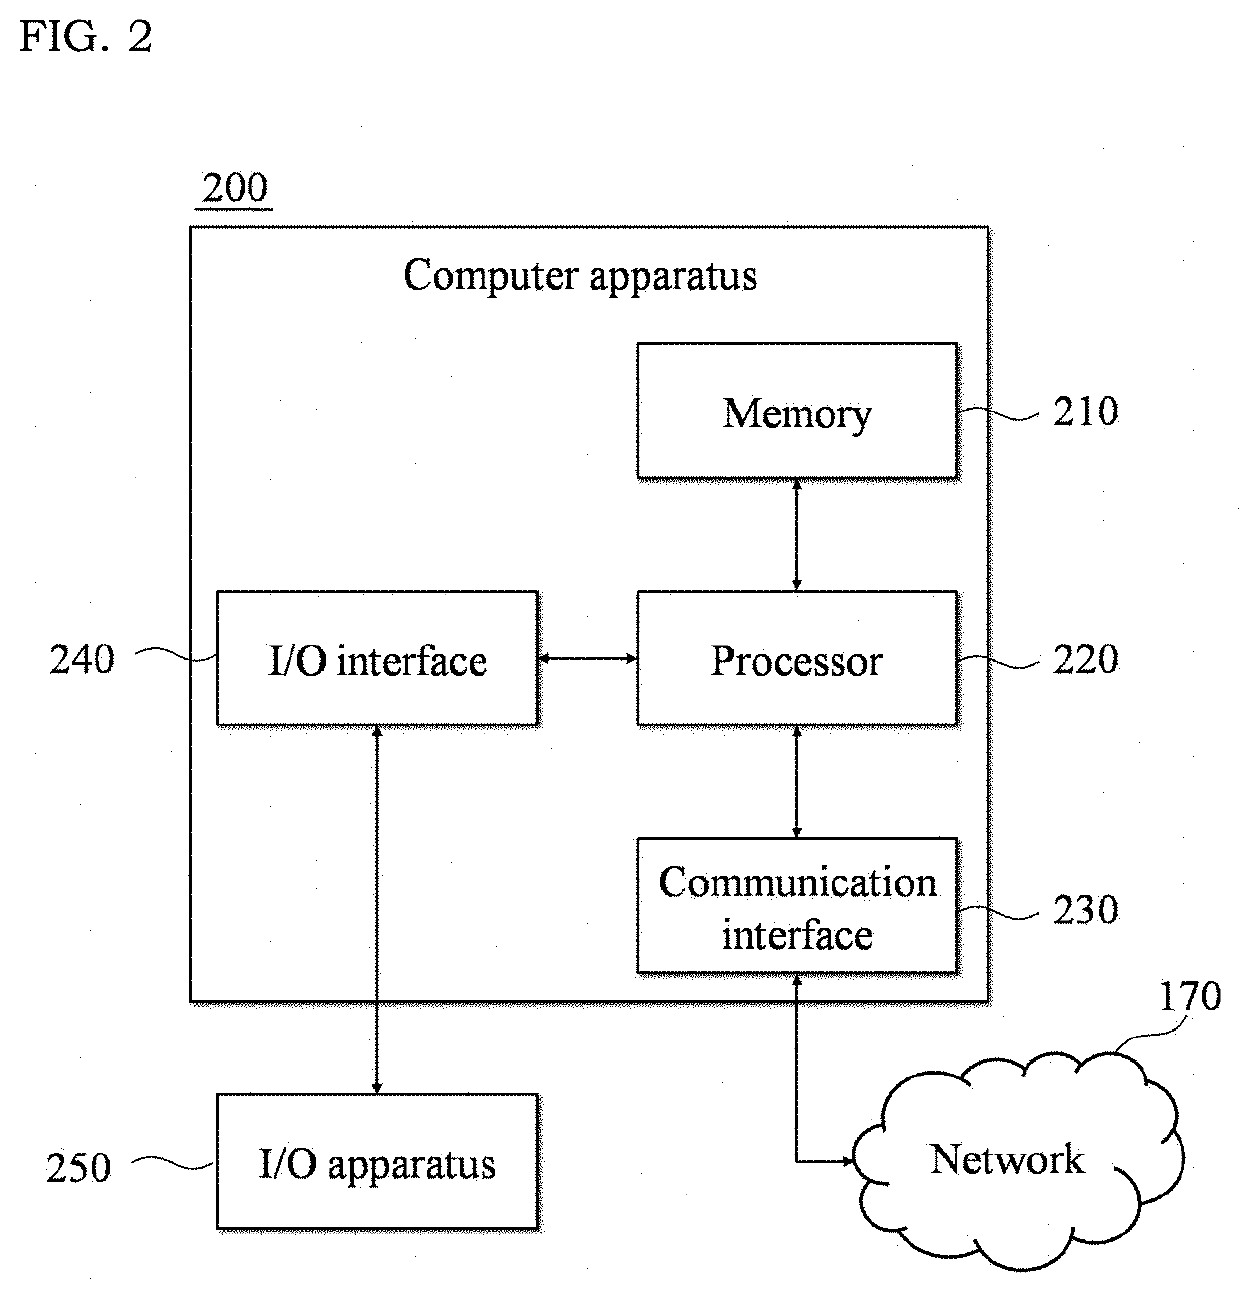 Method and system for real time measuring quality of video call service